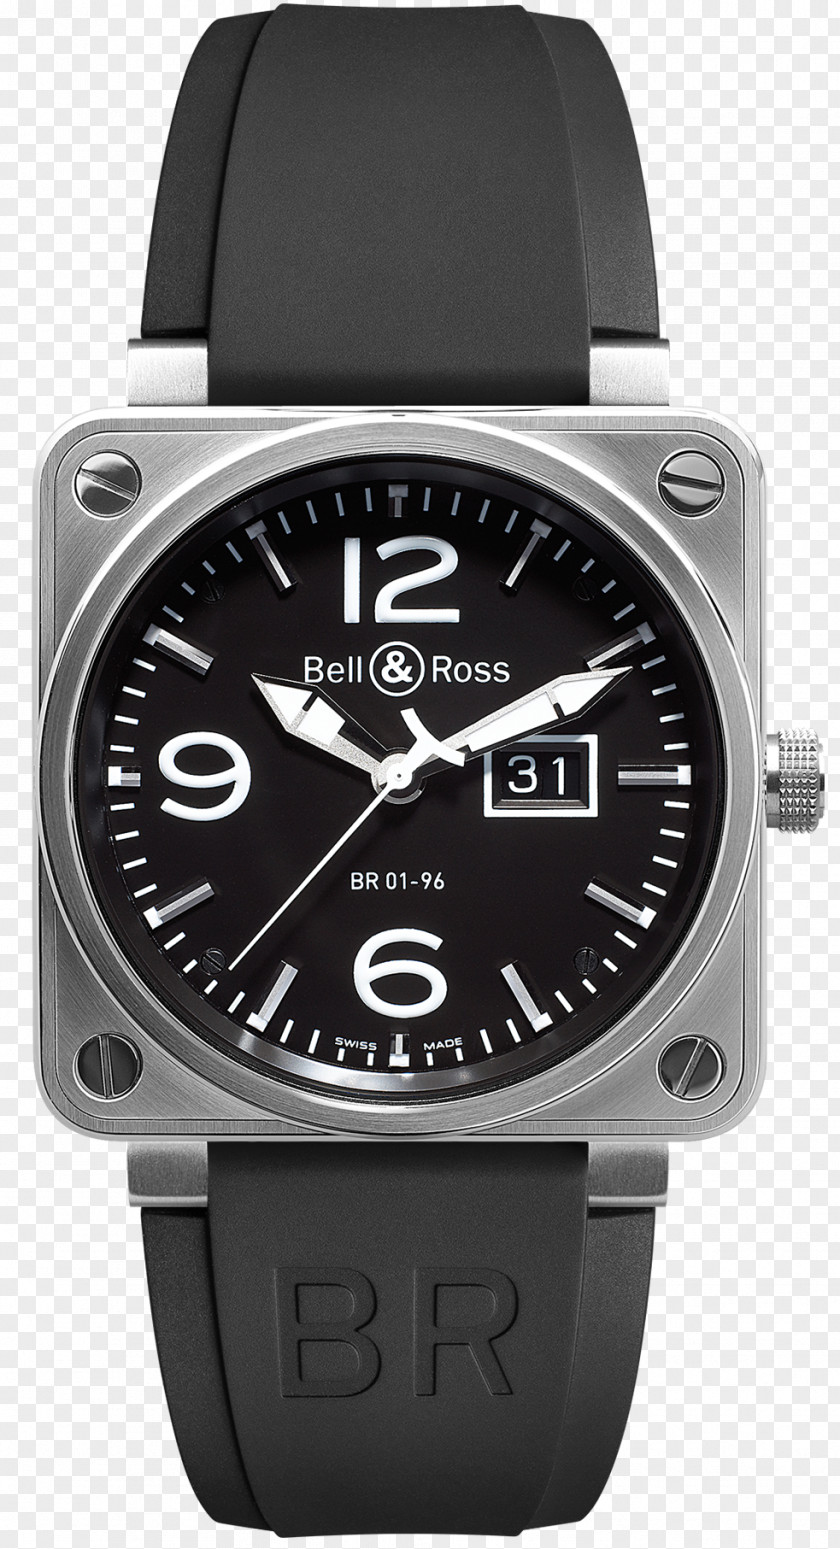 Watch Bell & Ross, Inc. Automatic Retail PNG